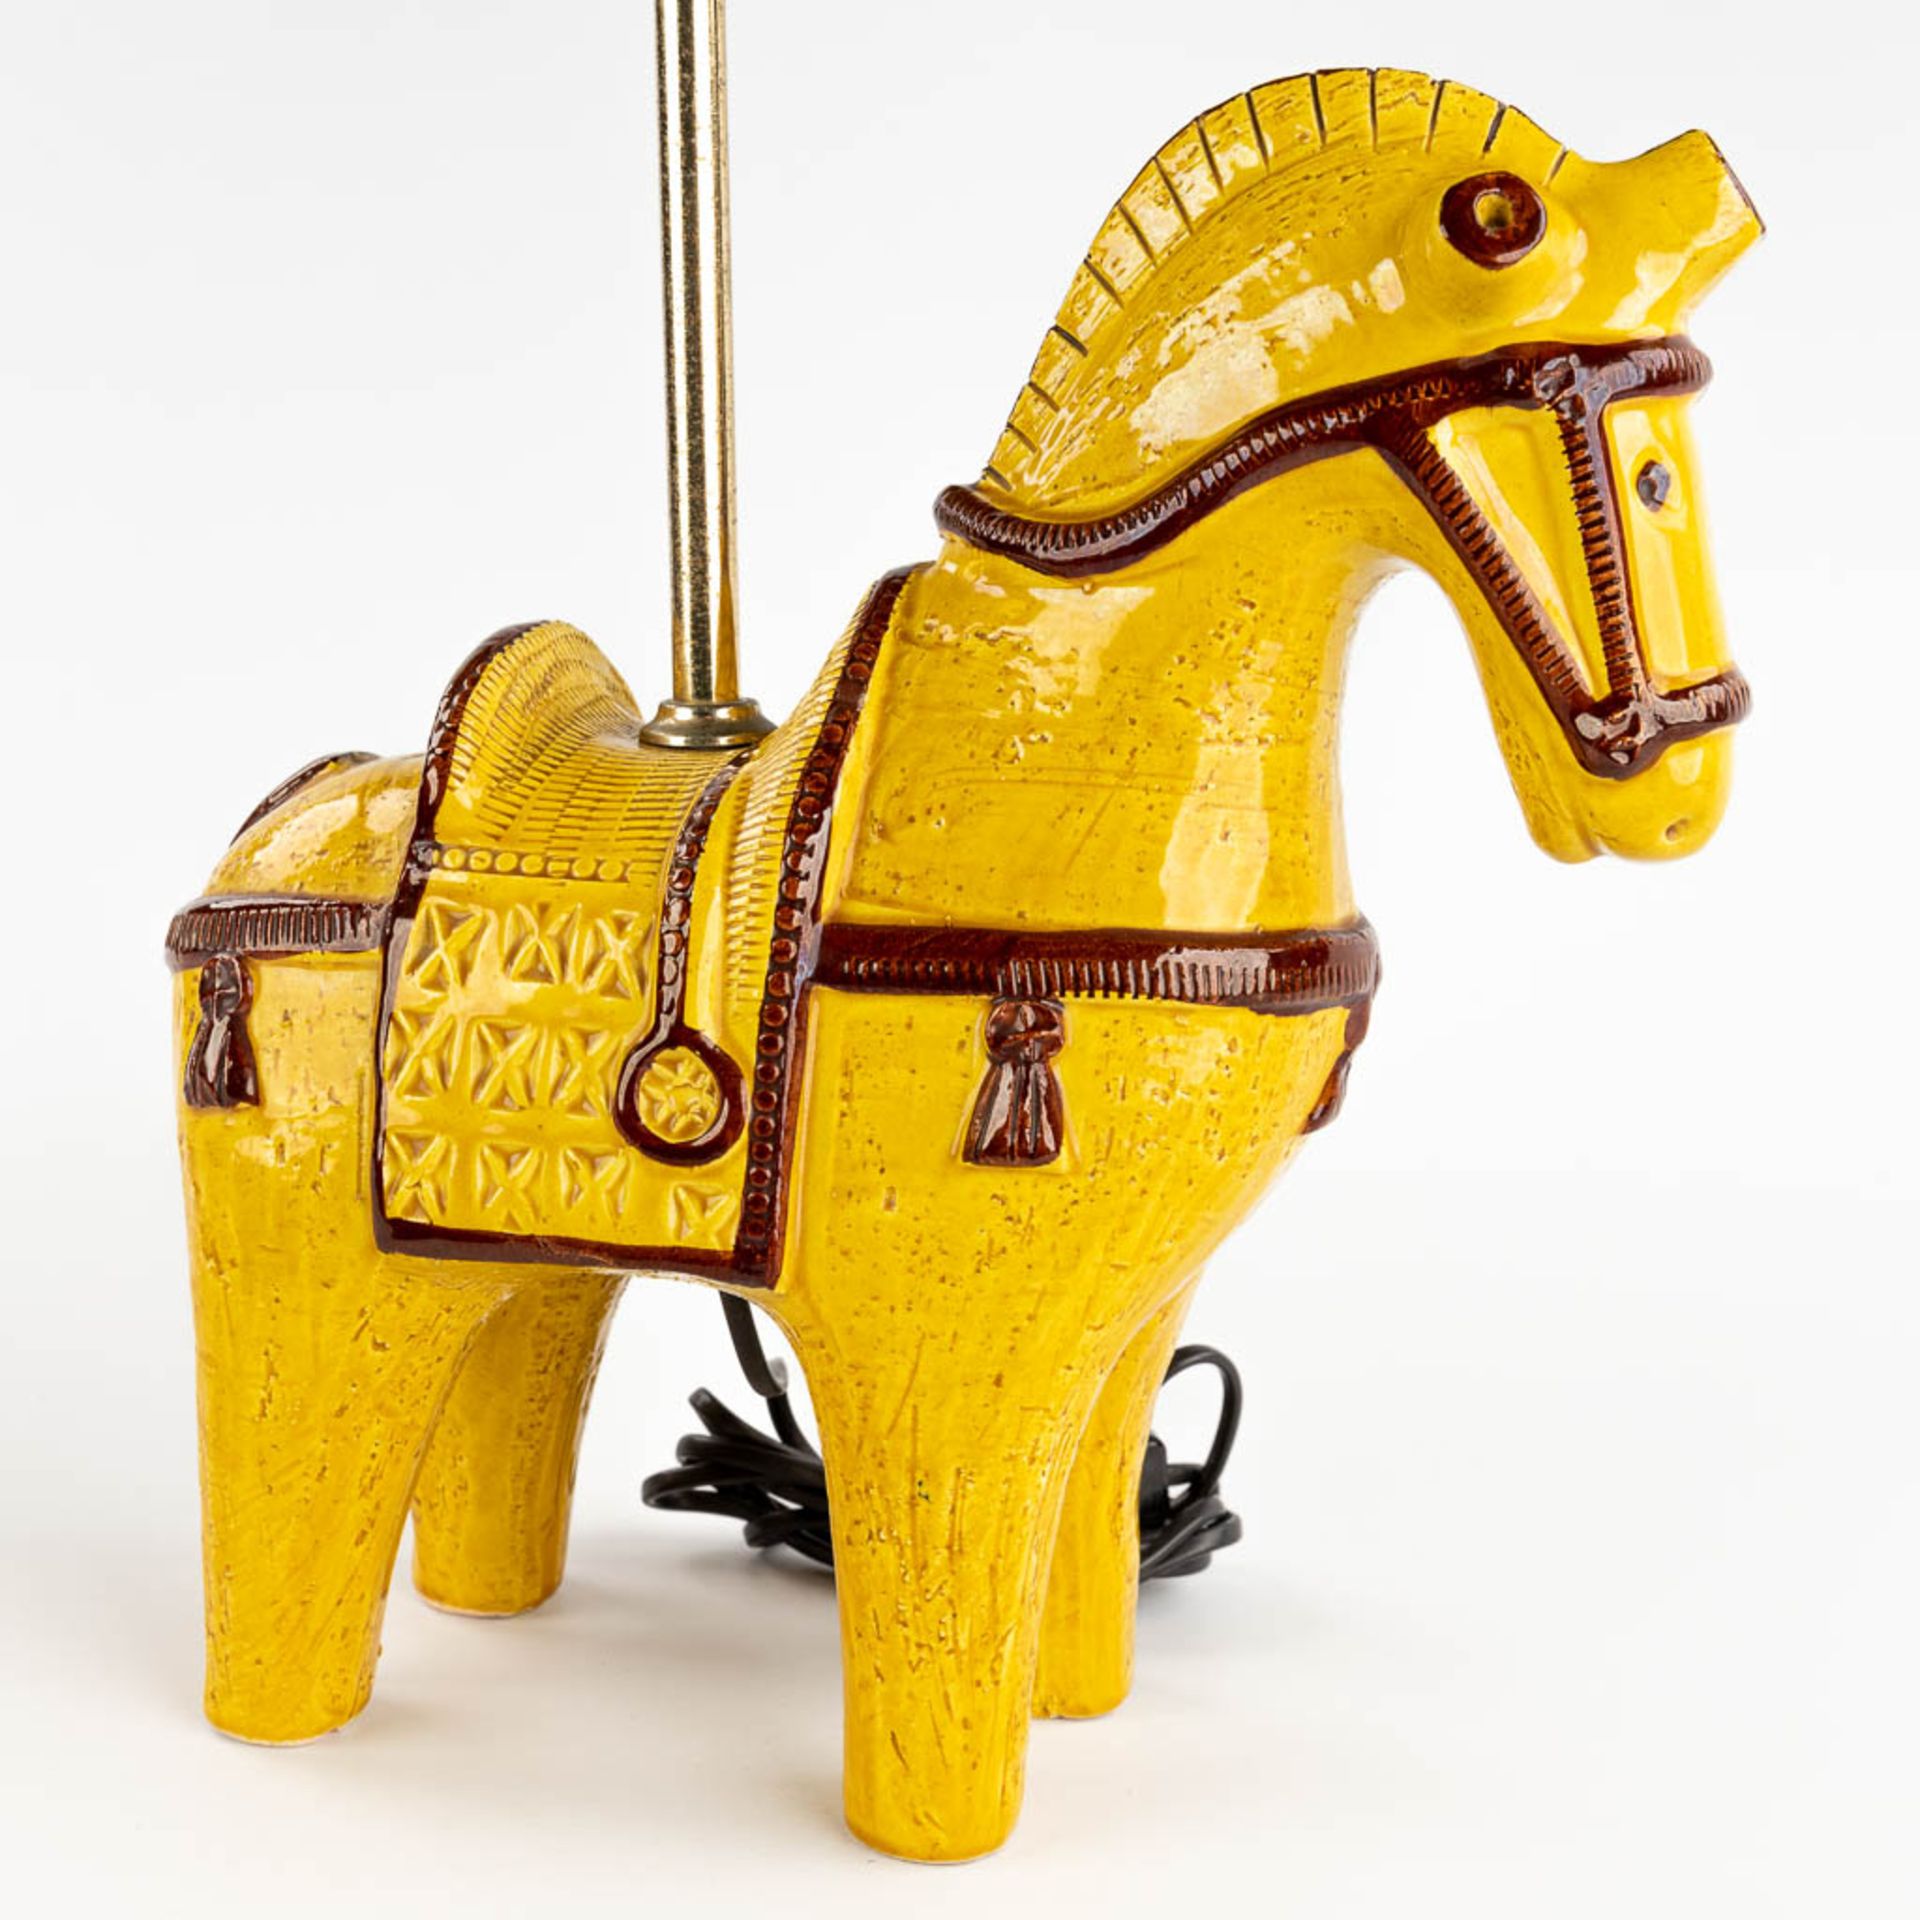 Aldo LONDI (1911-2003) 'Table Lamp with a yellow horse' for Bitossi. (D:12 x W:30 x H:32 cm) - Bild 9 aus 12